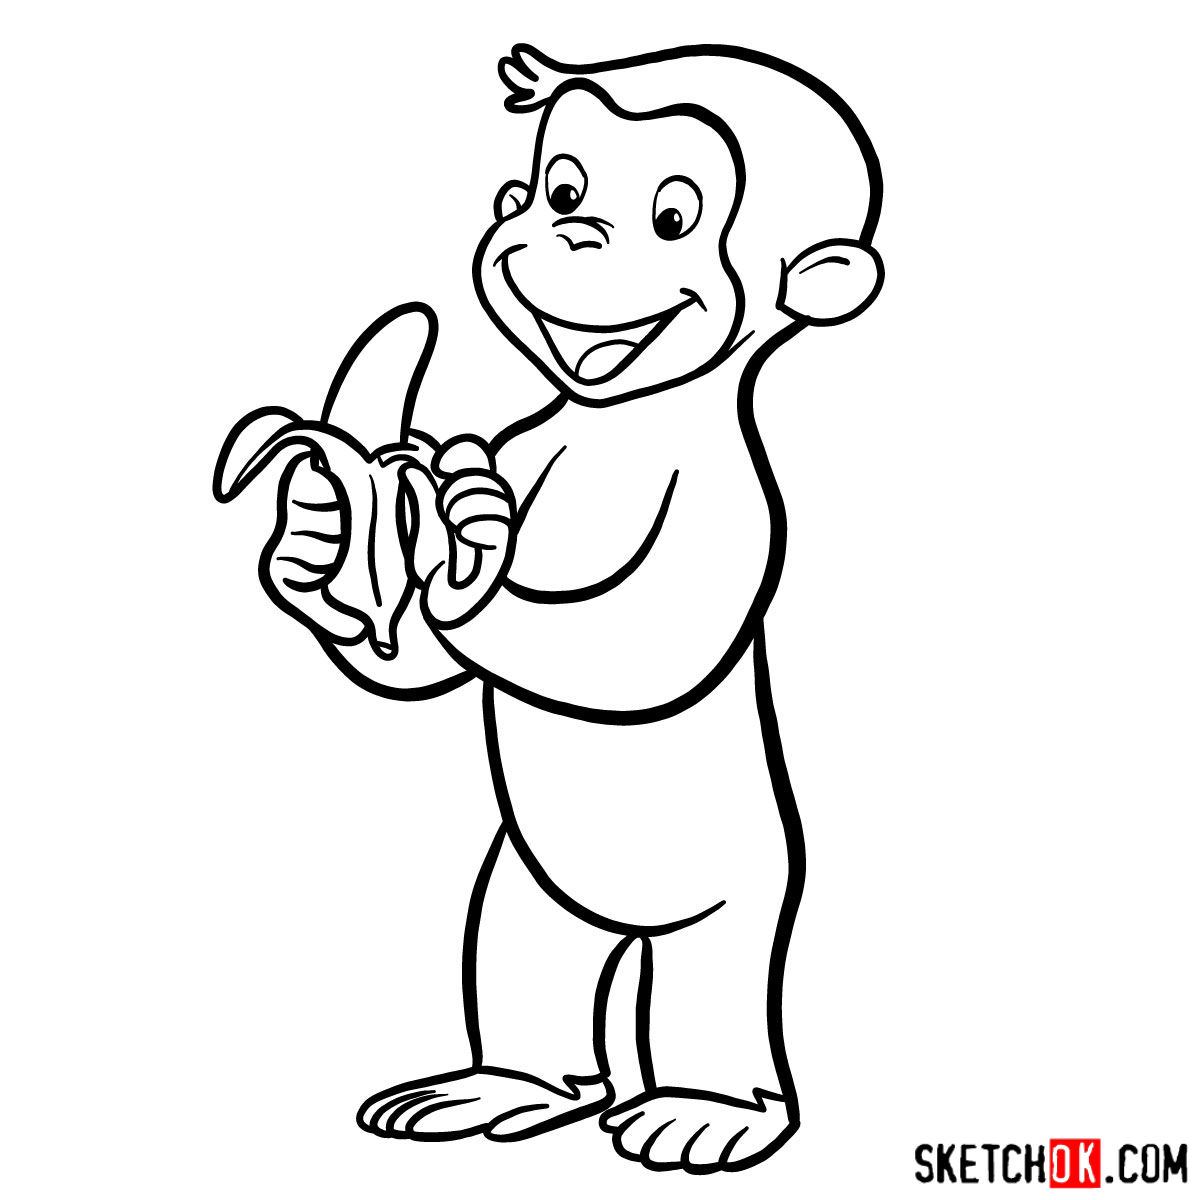 How to draw Curious George - step 09